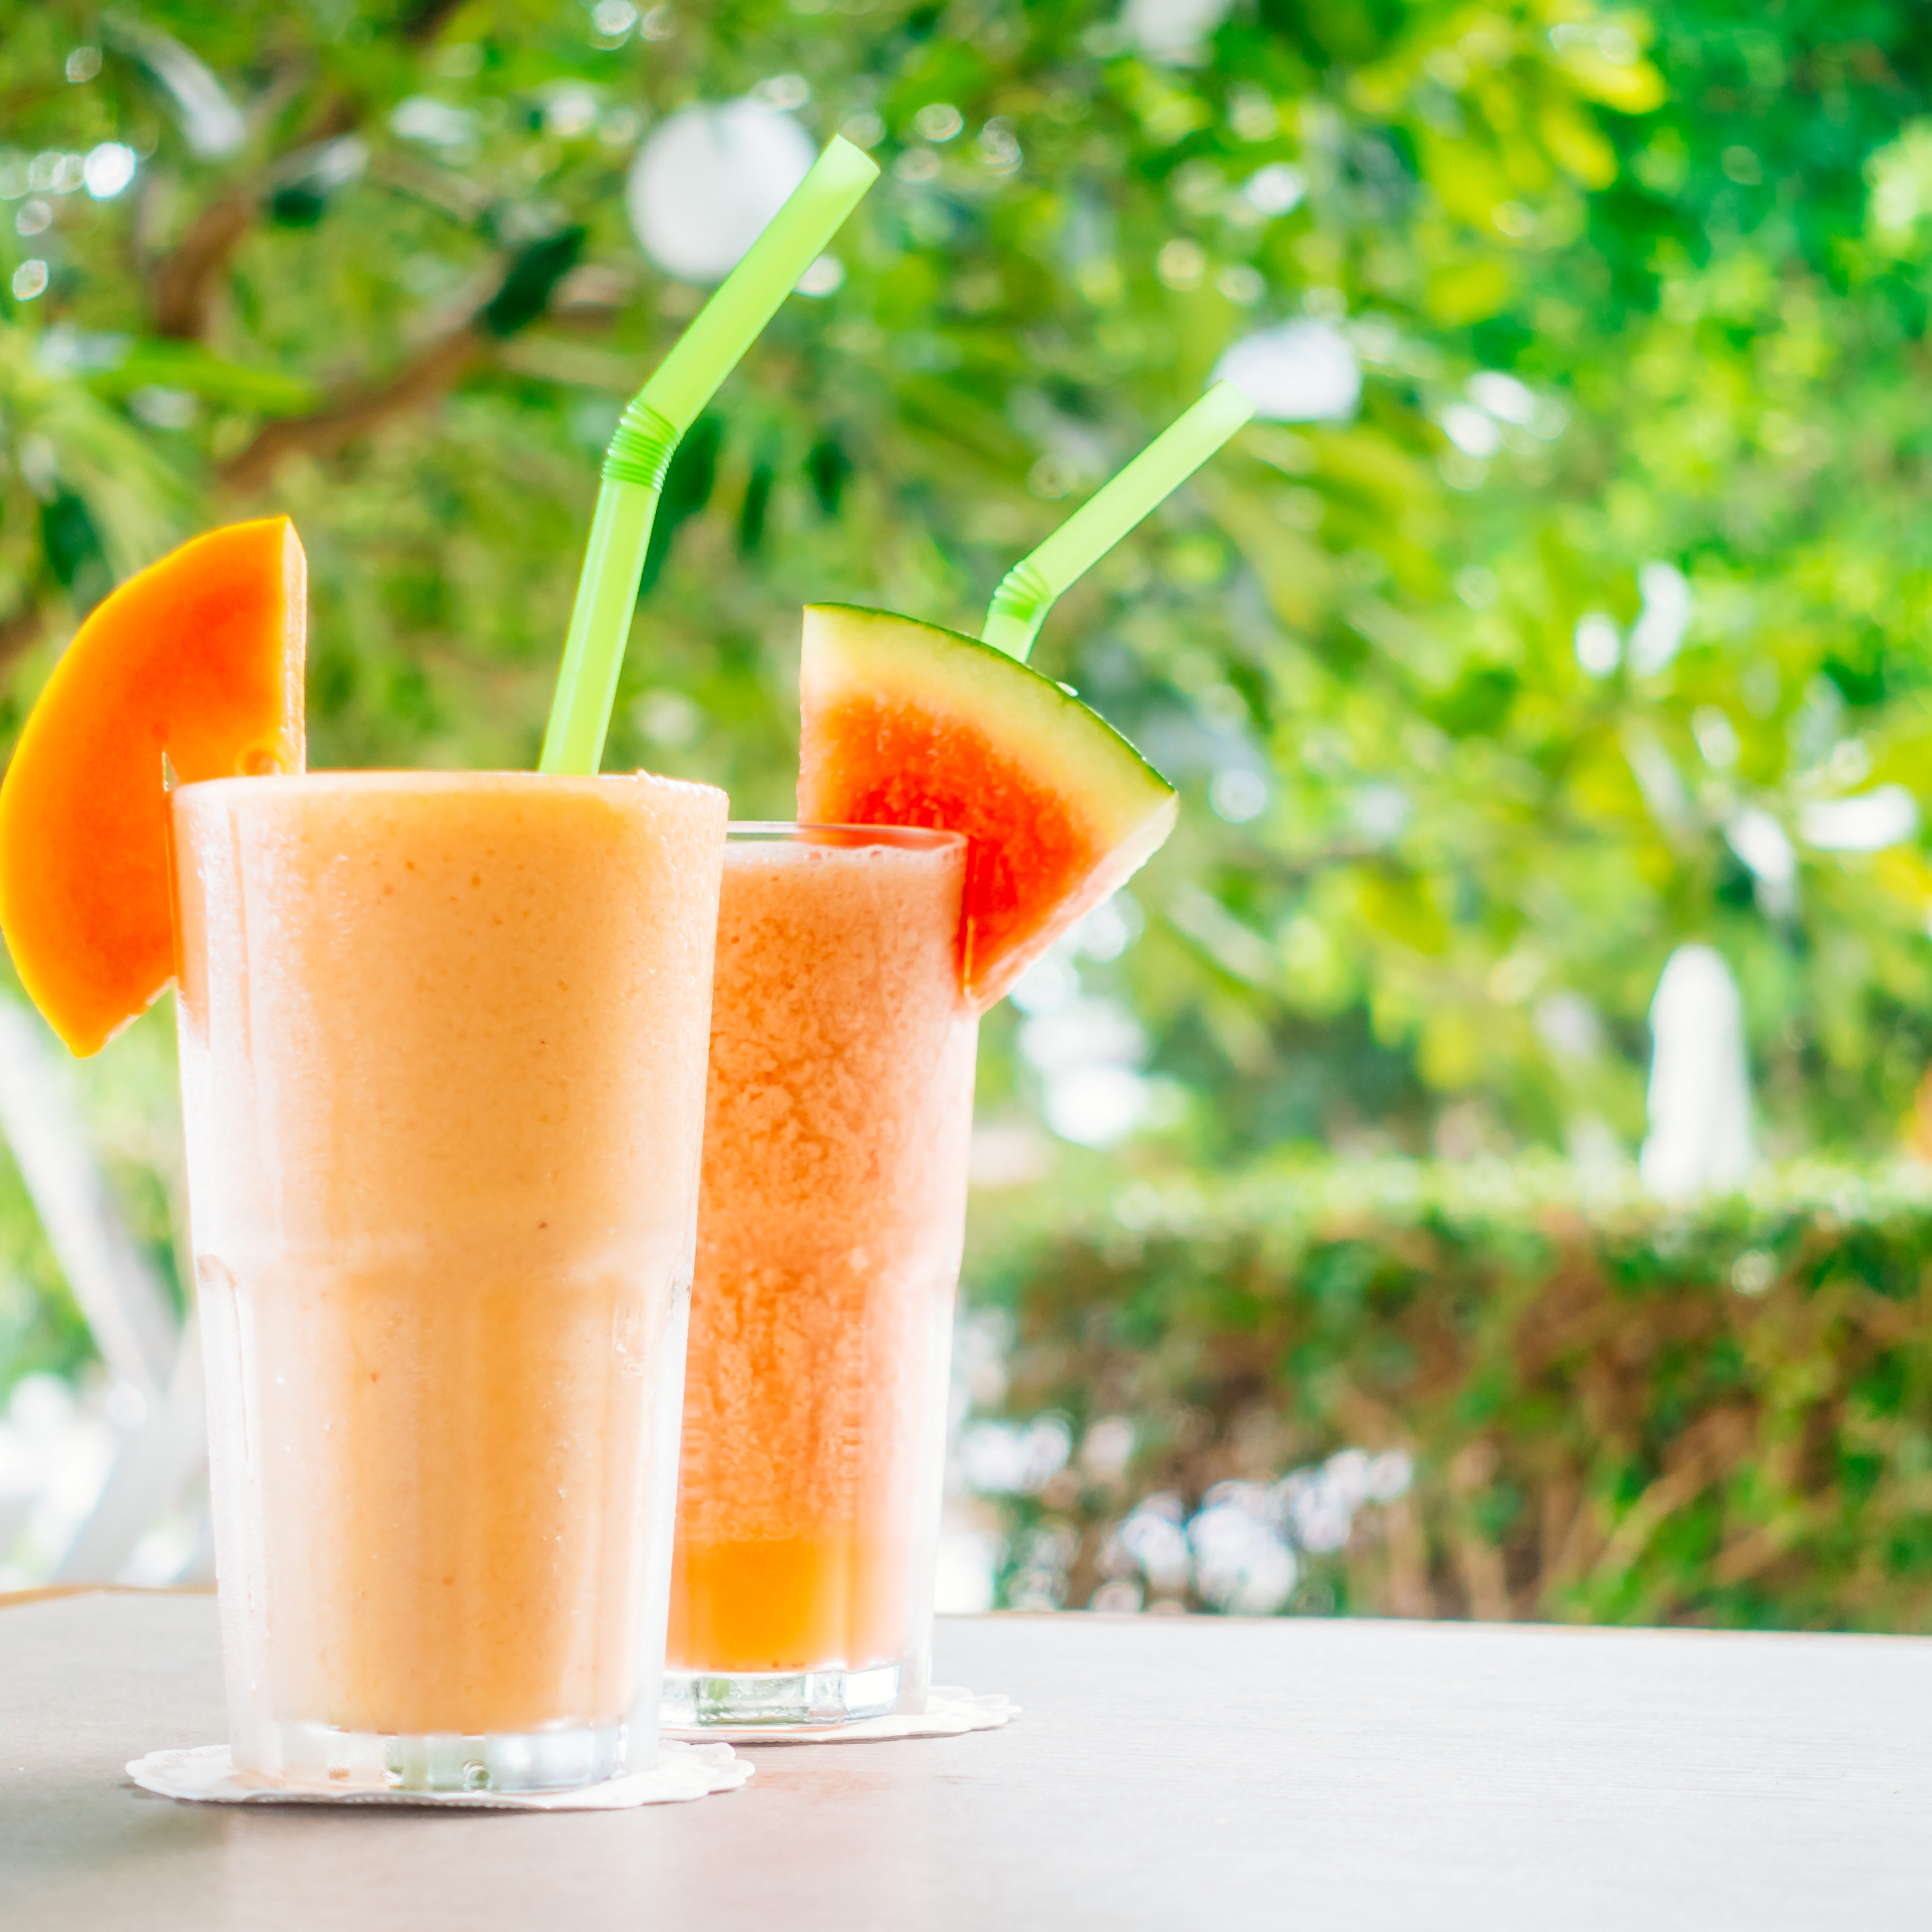 Watermon fruit and papaya juice smoothies in glass for healthy food and drink